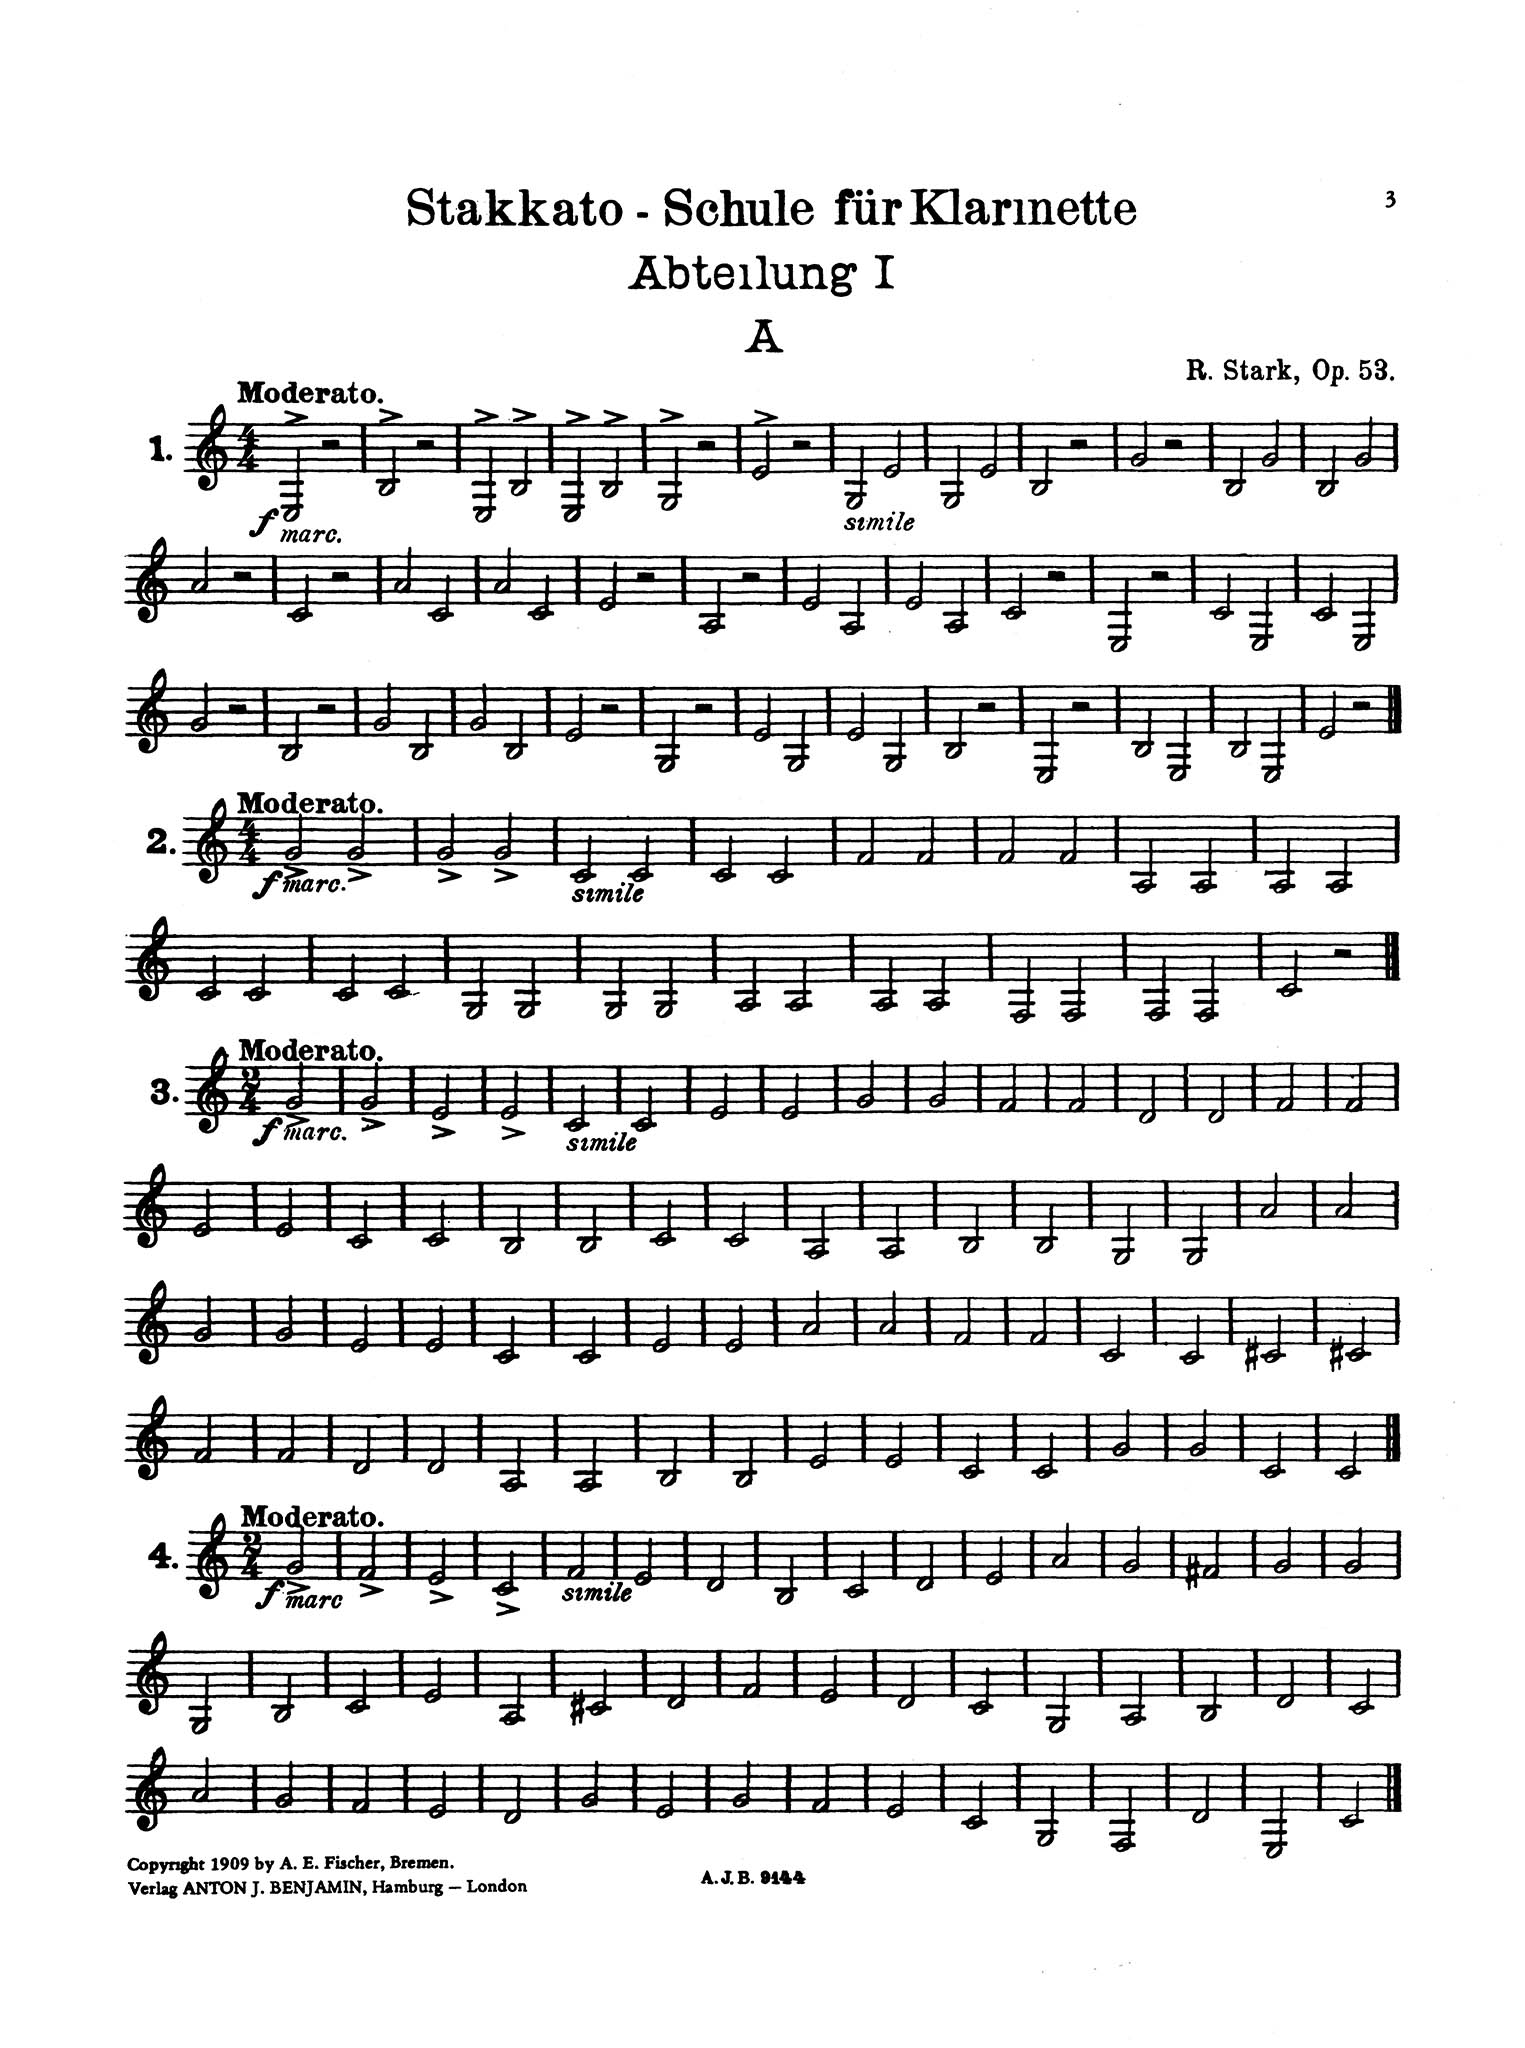 Practical Staccato School for Clarinet, Book 1 Page 3